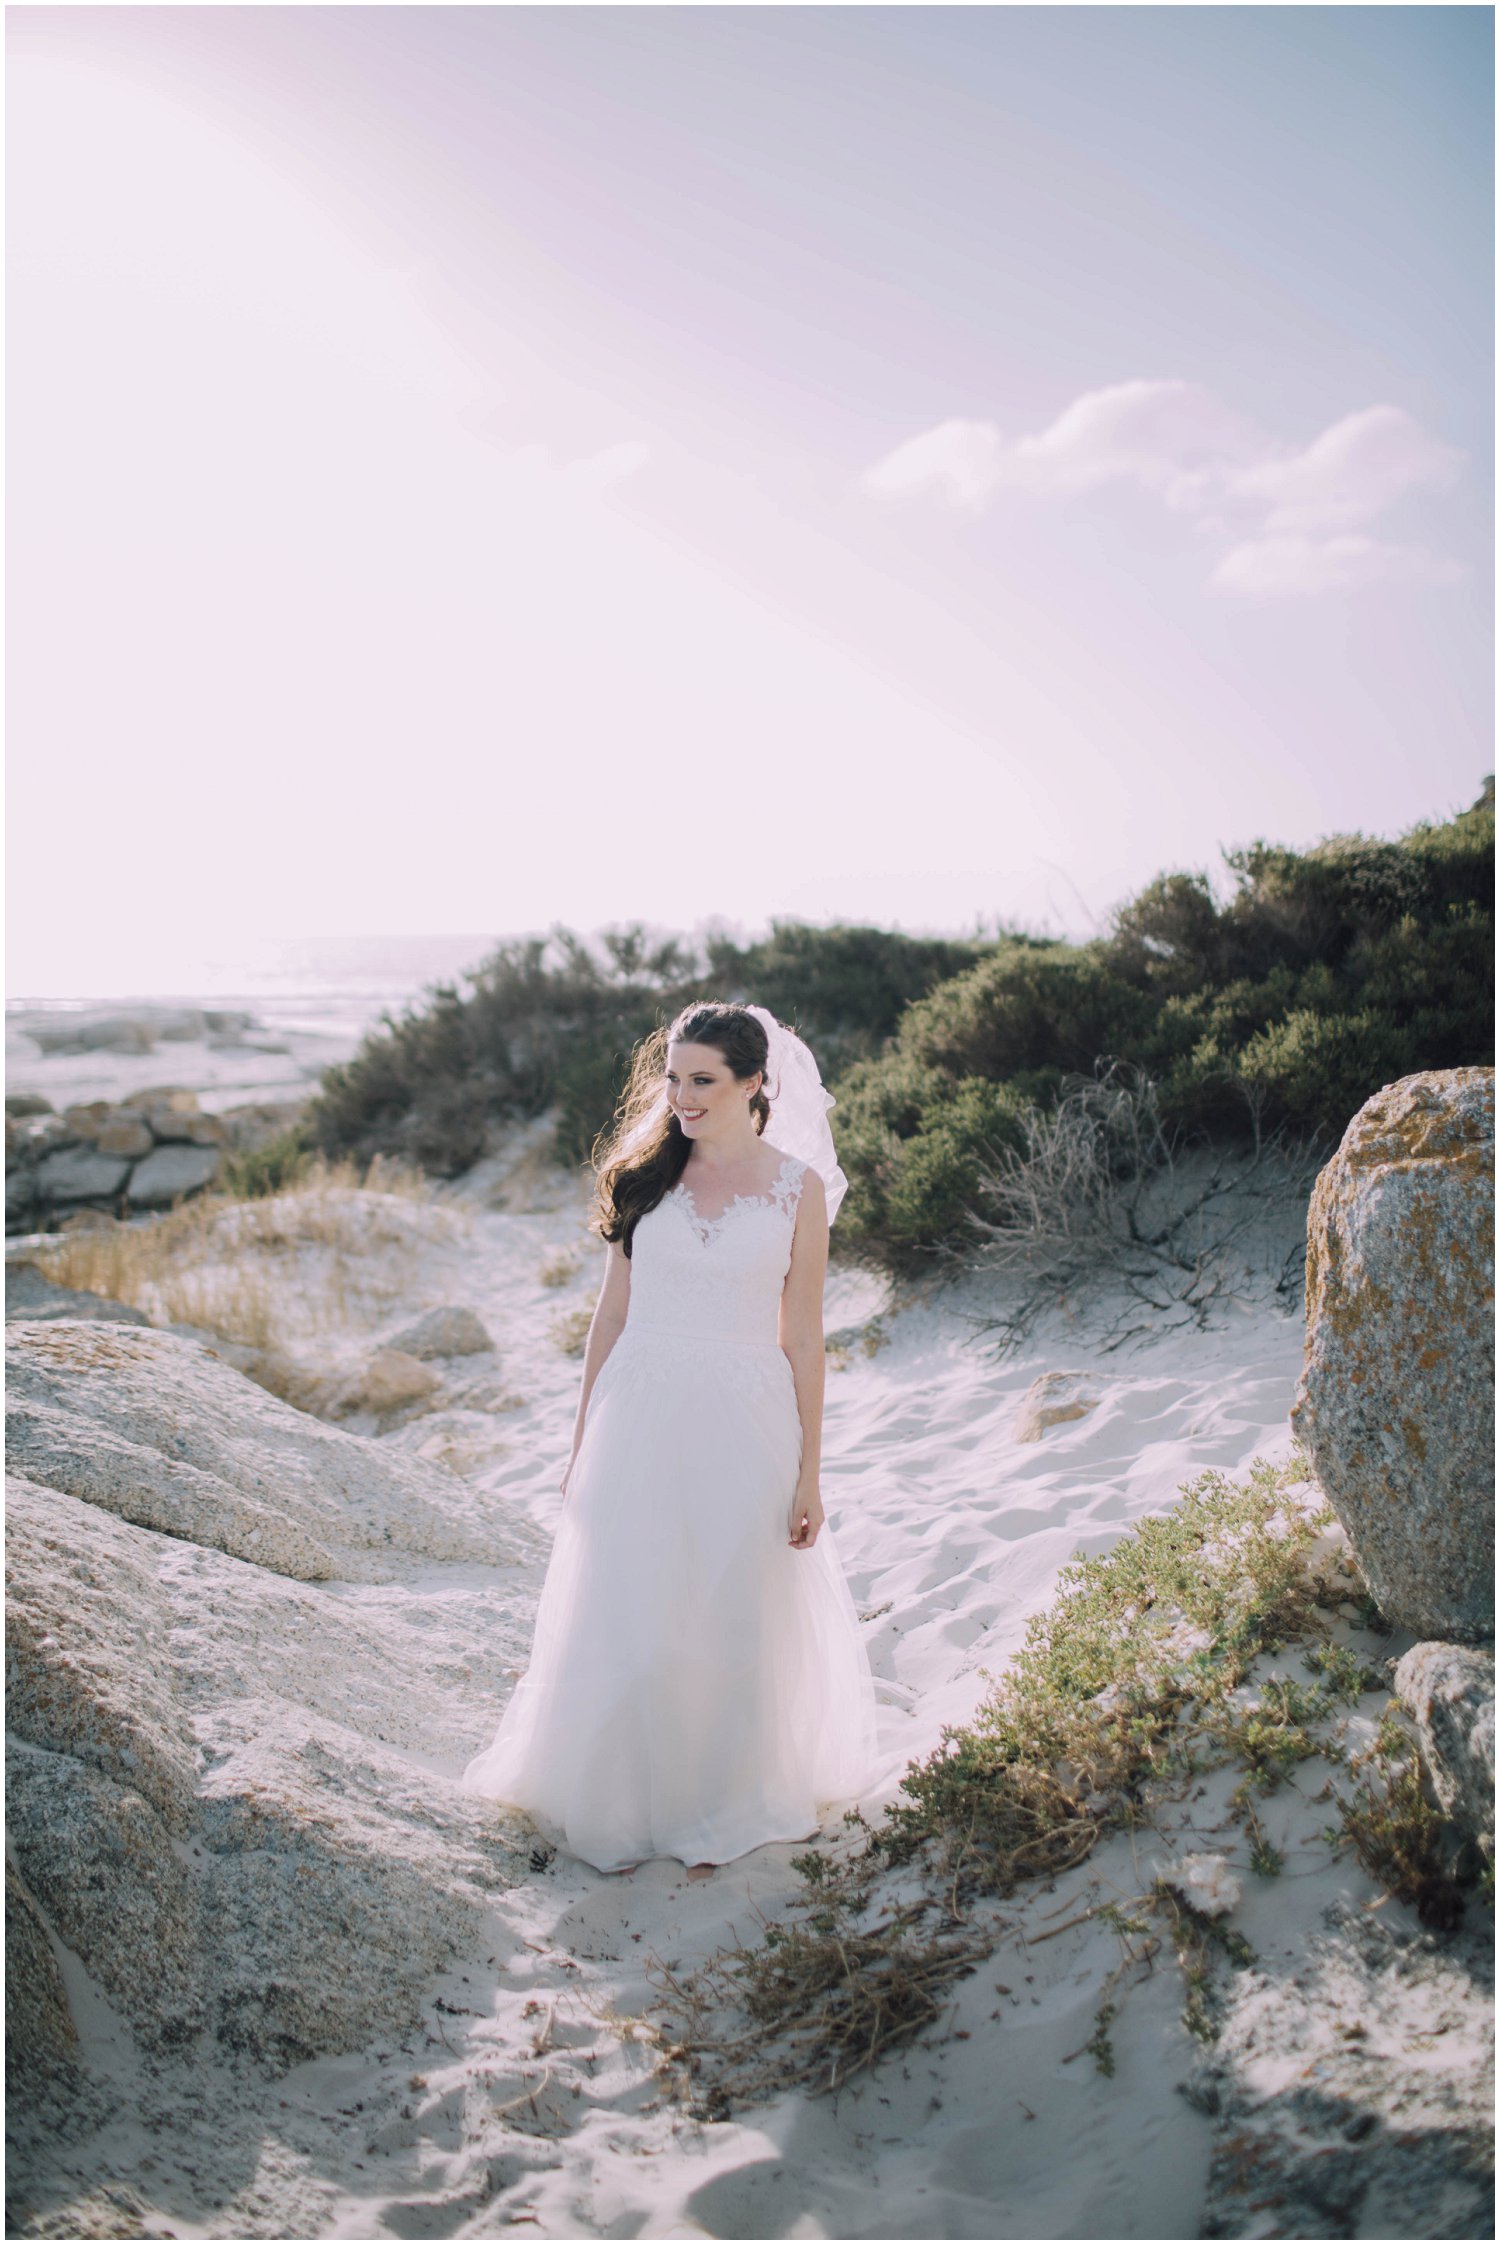 Top Wedding Photographer Cape Town South Africa Artistic Creative Documentary Wedding Photography Rue Kruger_0561.jpg